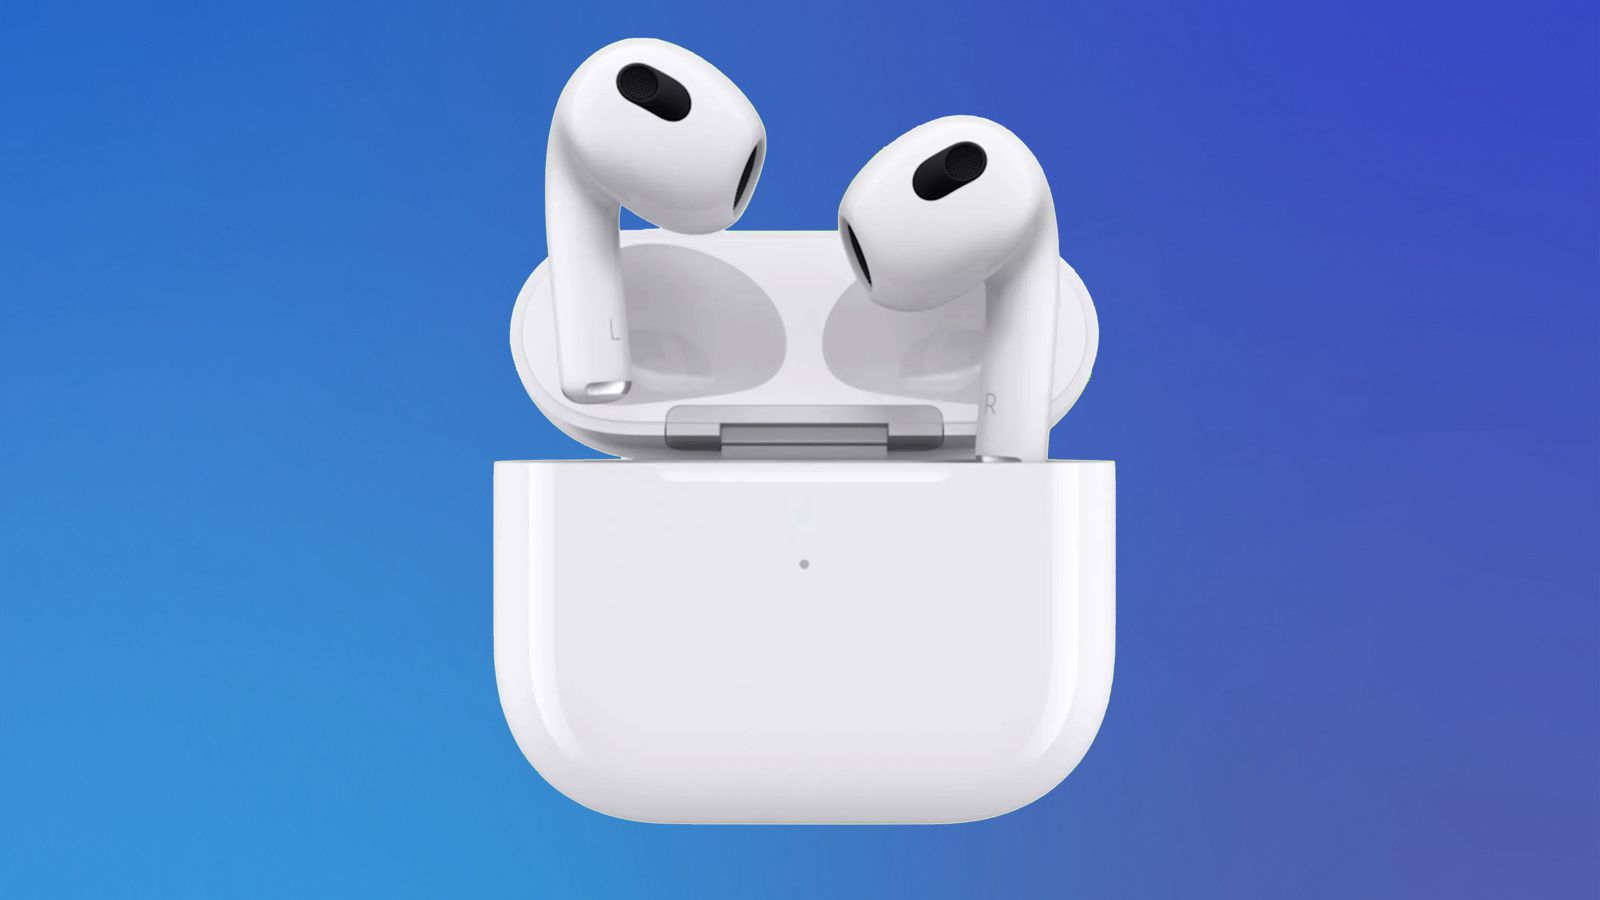 Deals: AirPods 3 Drop to New Record Low Price of $134.99 ($35 Off)